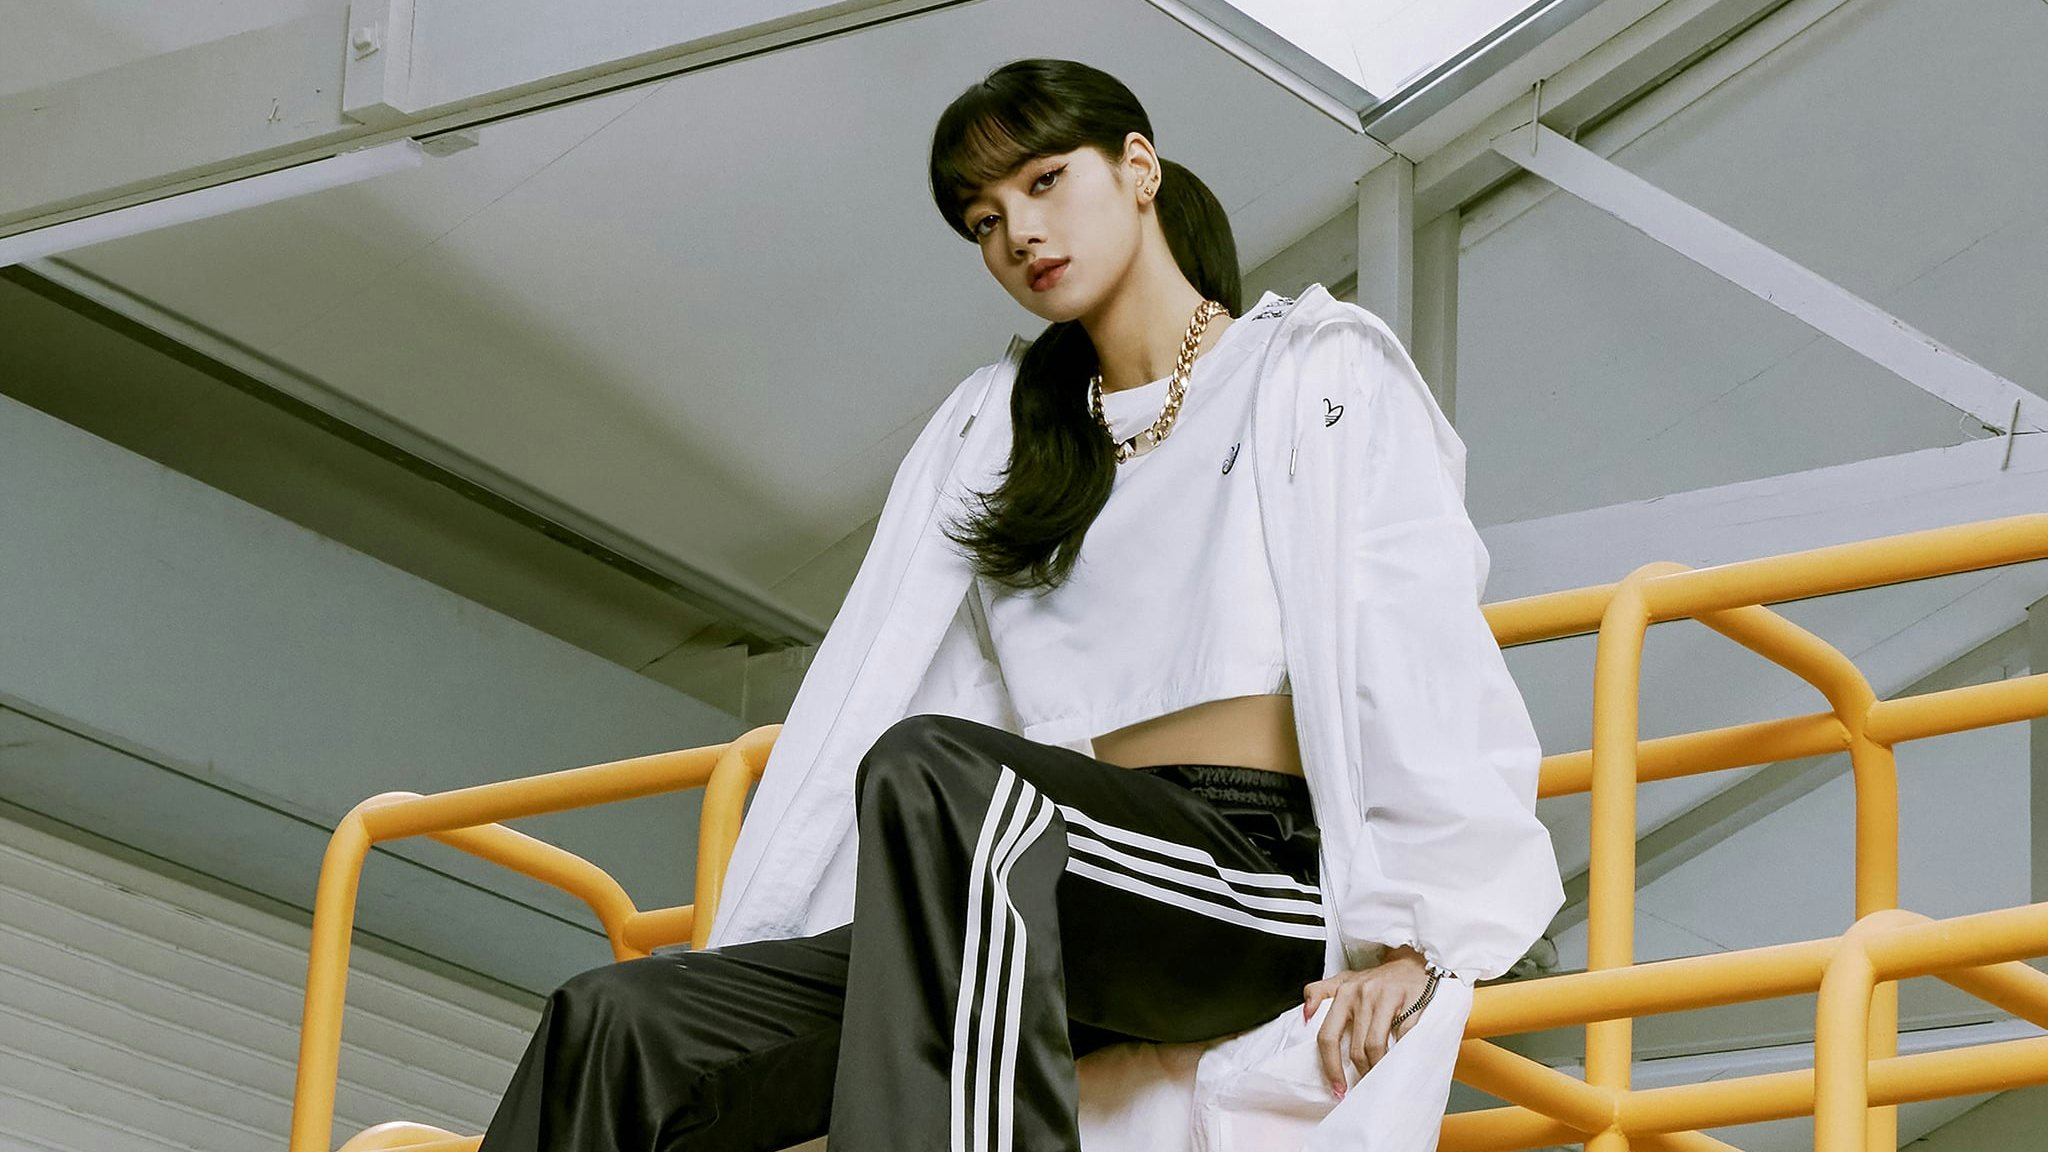 Harper’s Bazaar China has quietly removed images of the BLACKPINK star from its social media, as the boycott against Western firms rages on. Photo: Courtesy of Adidas